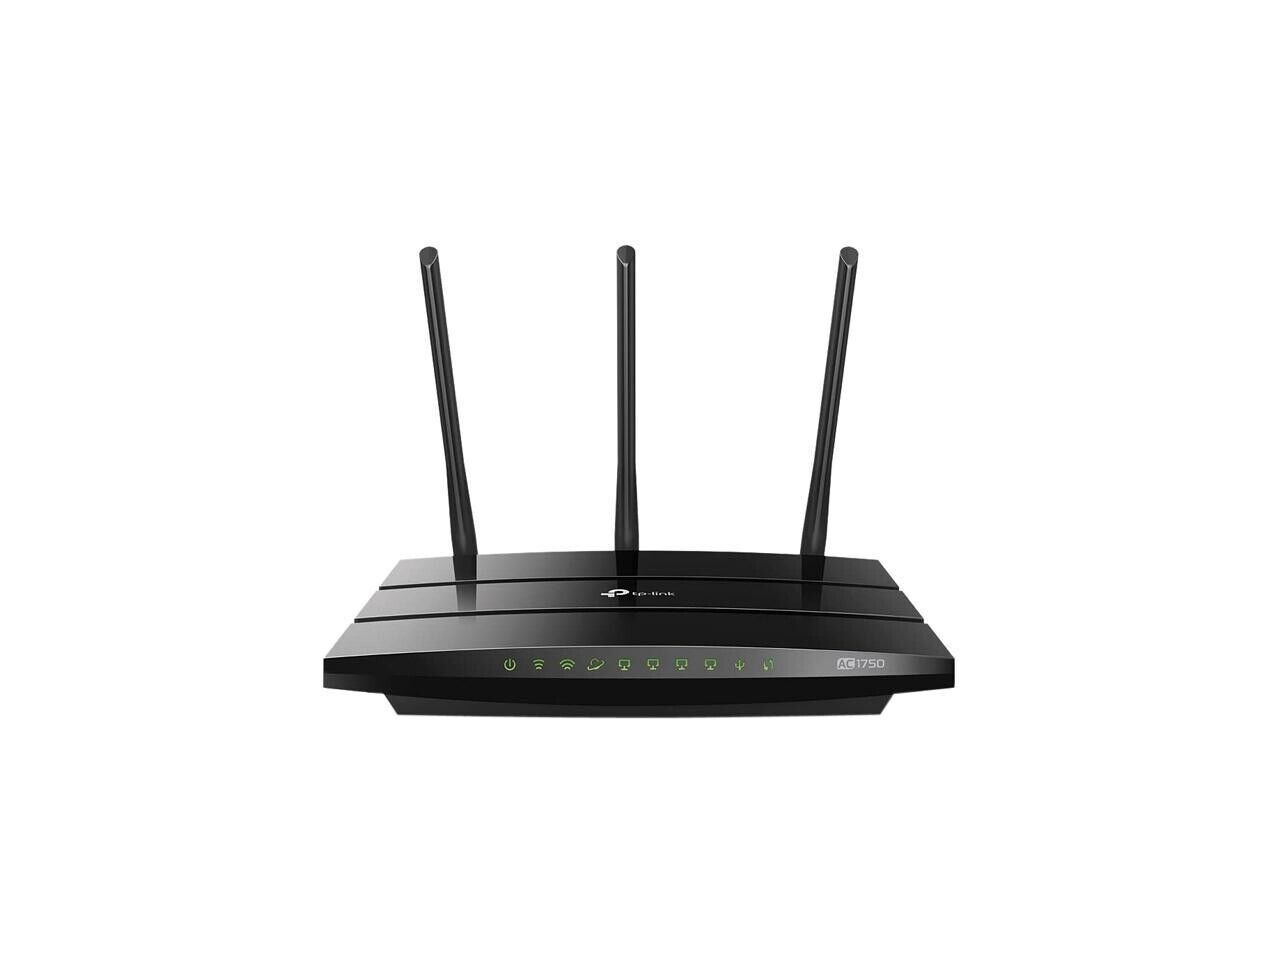 TP-Link Archer A7 AC1750 Wireless Dual-Band Gigabit Router - Black - NEW IN BOX